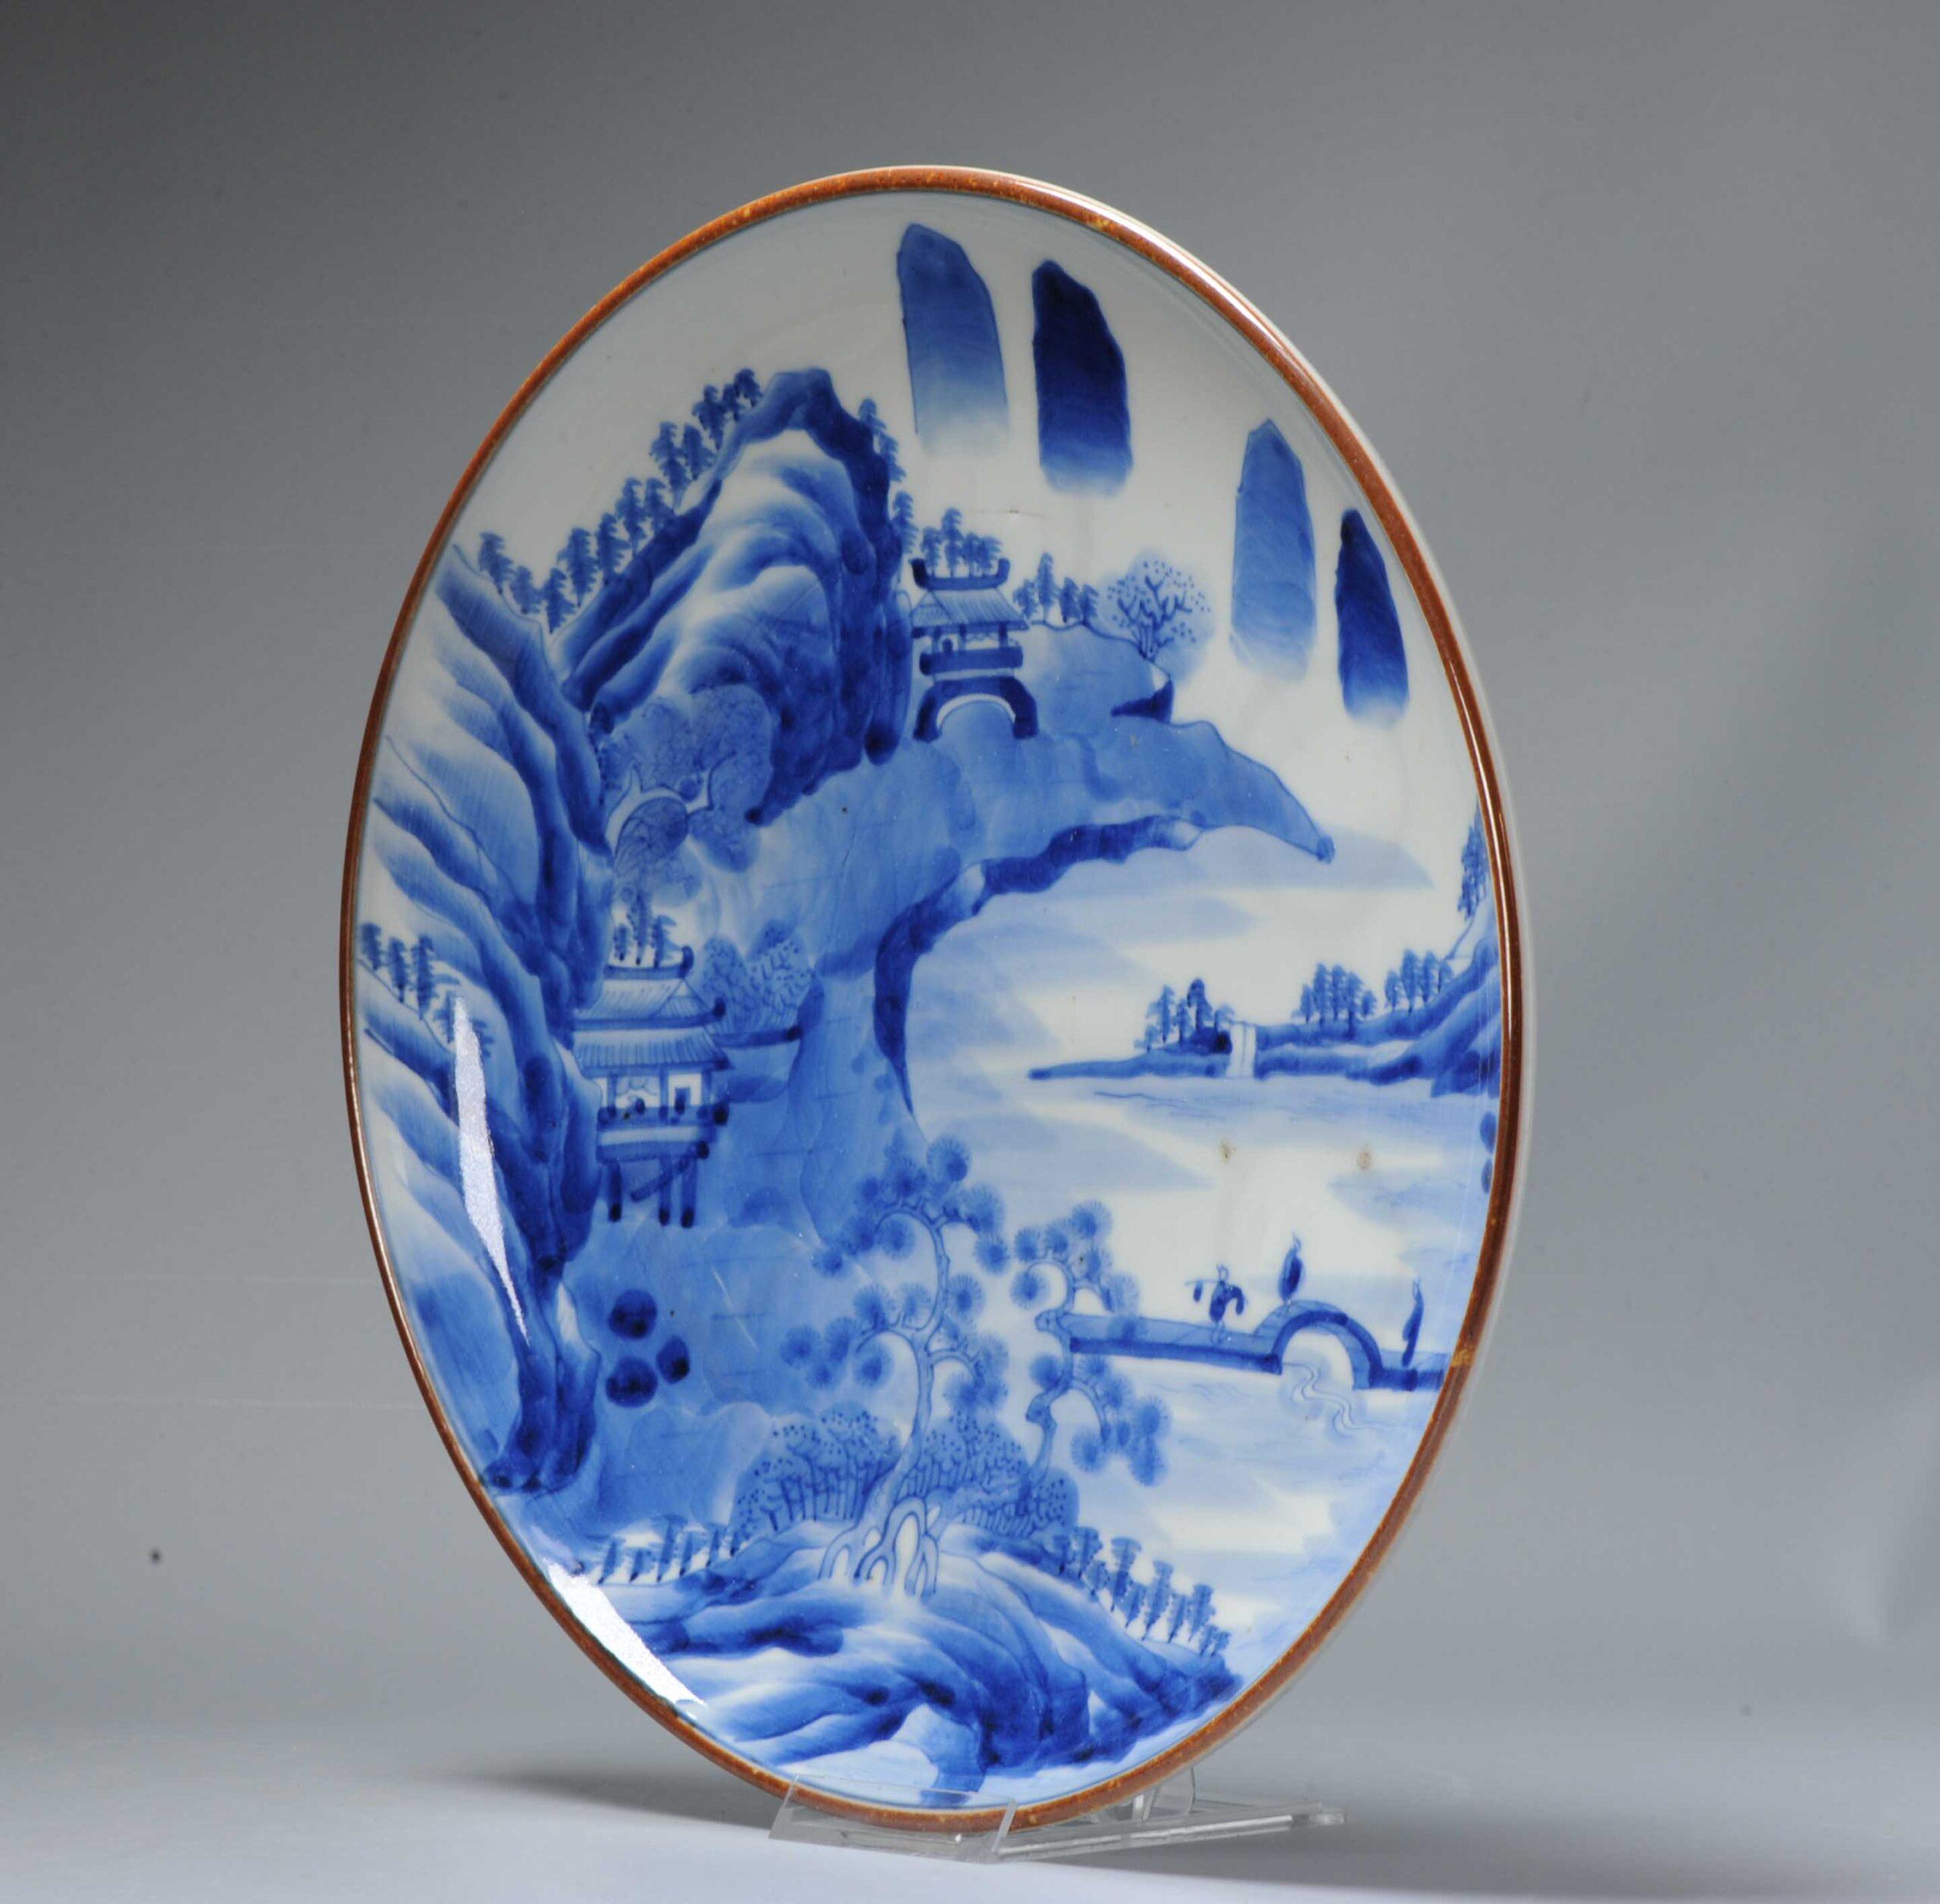 This magnificent Japanese large dish dates to the 19th century, Late Edo or Early Meiji period.

Whether you're a collector of Japanese art or simply appreciate the beauty of fine craftsmanship, this plate is a must-have for any serious